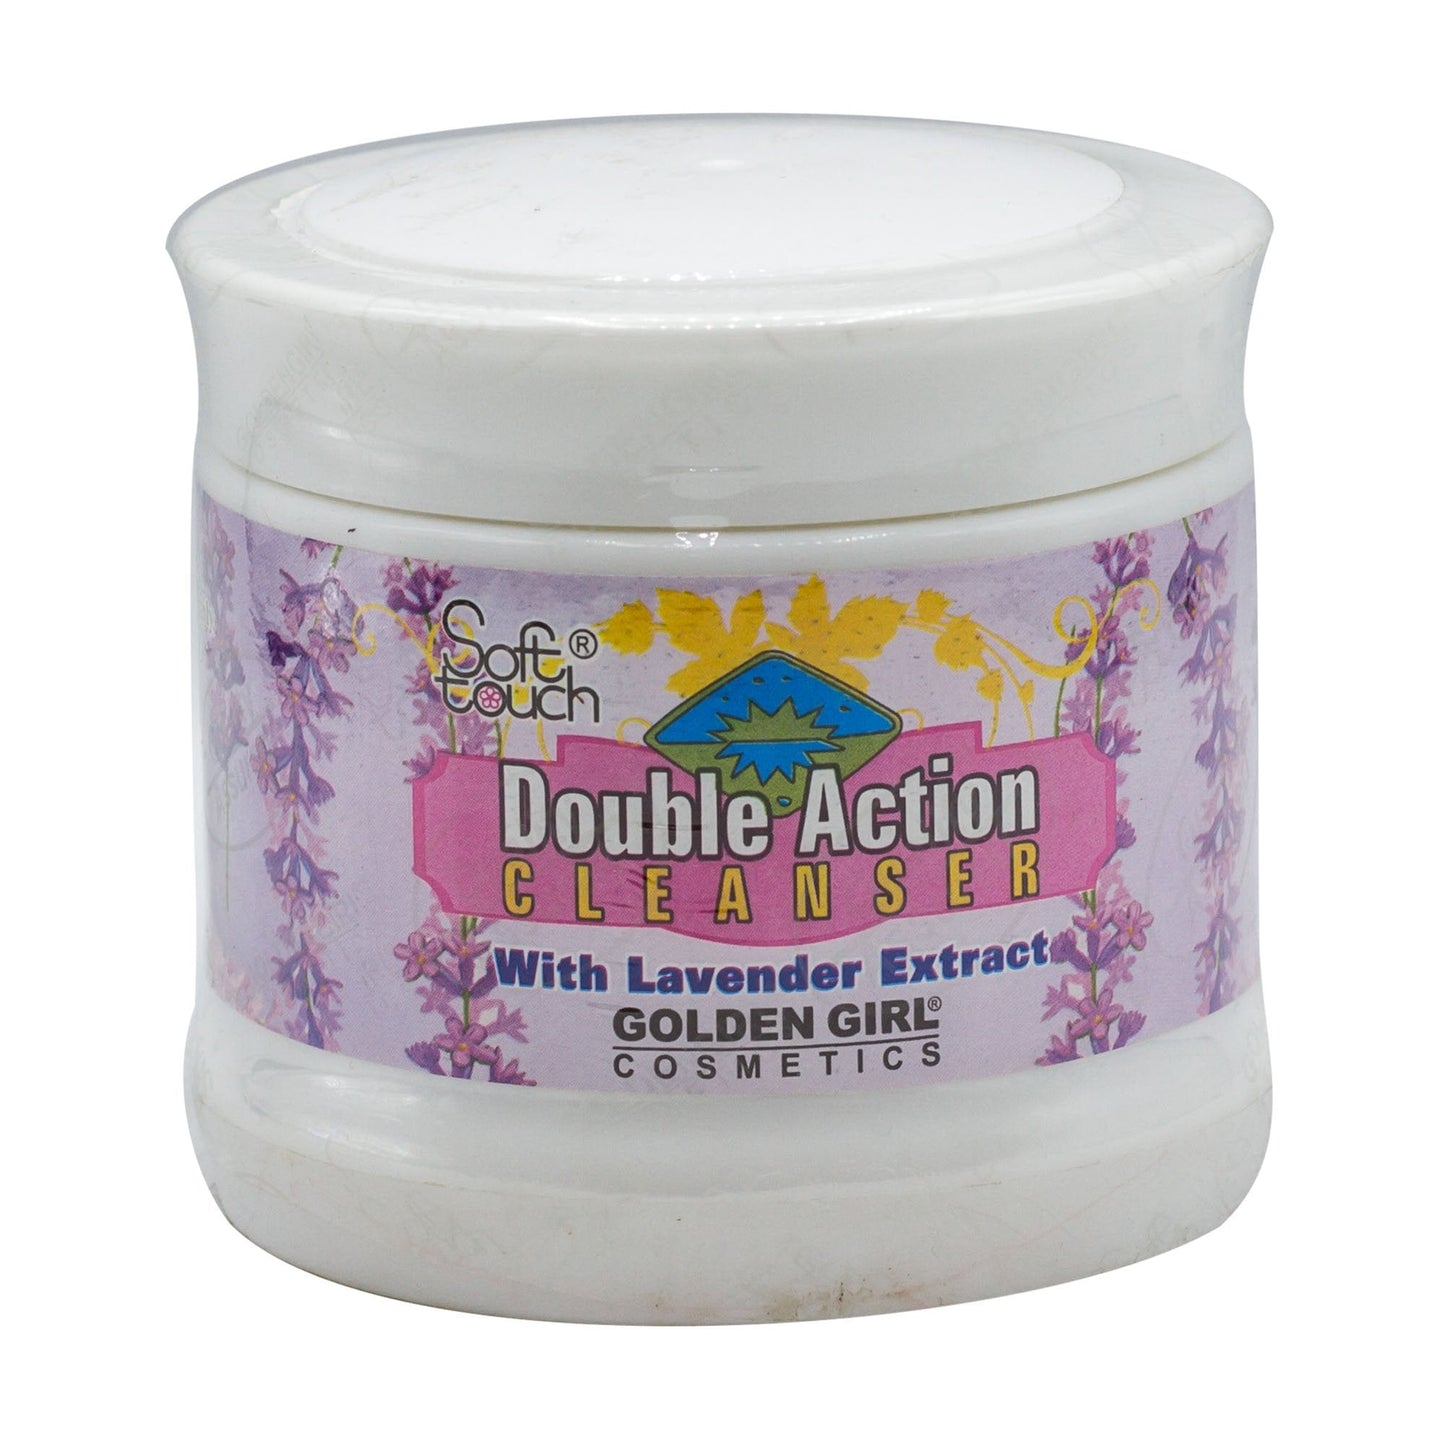 GOLDEN GIRL DOUBLE ACTION CLEANSER LAVENDER SOFT TOUCH 300 M